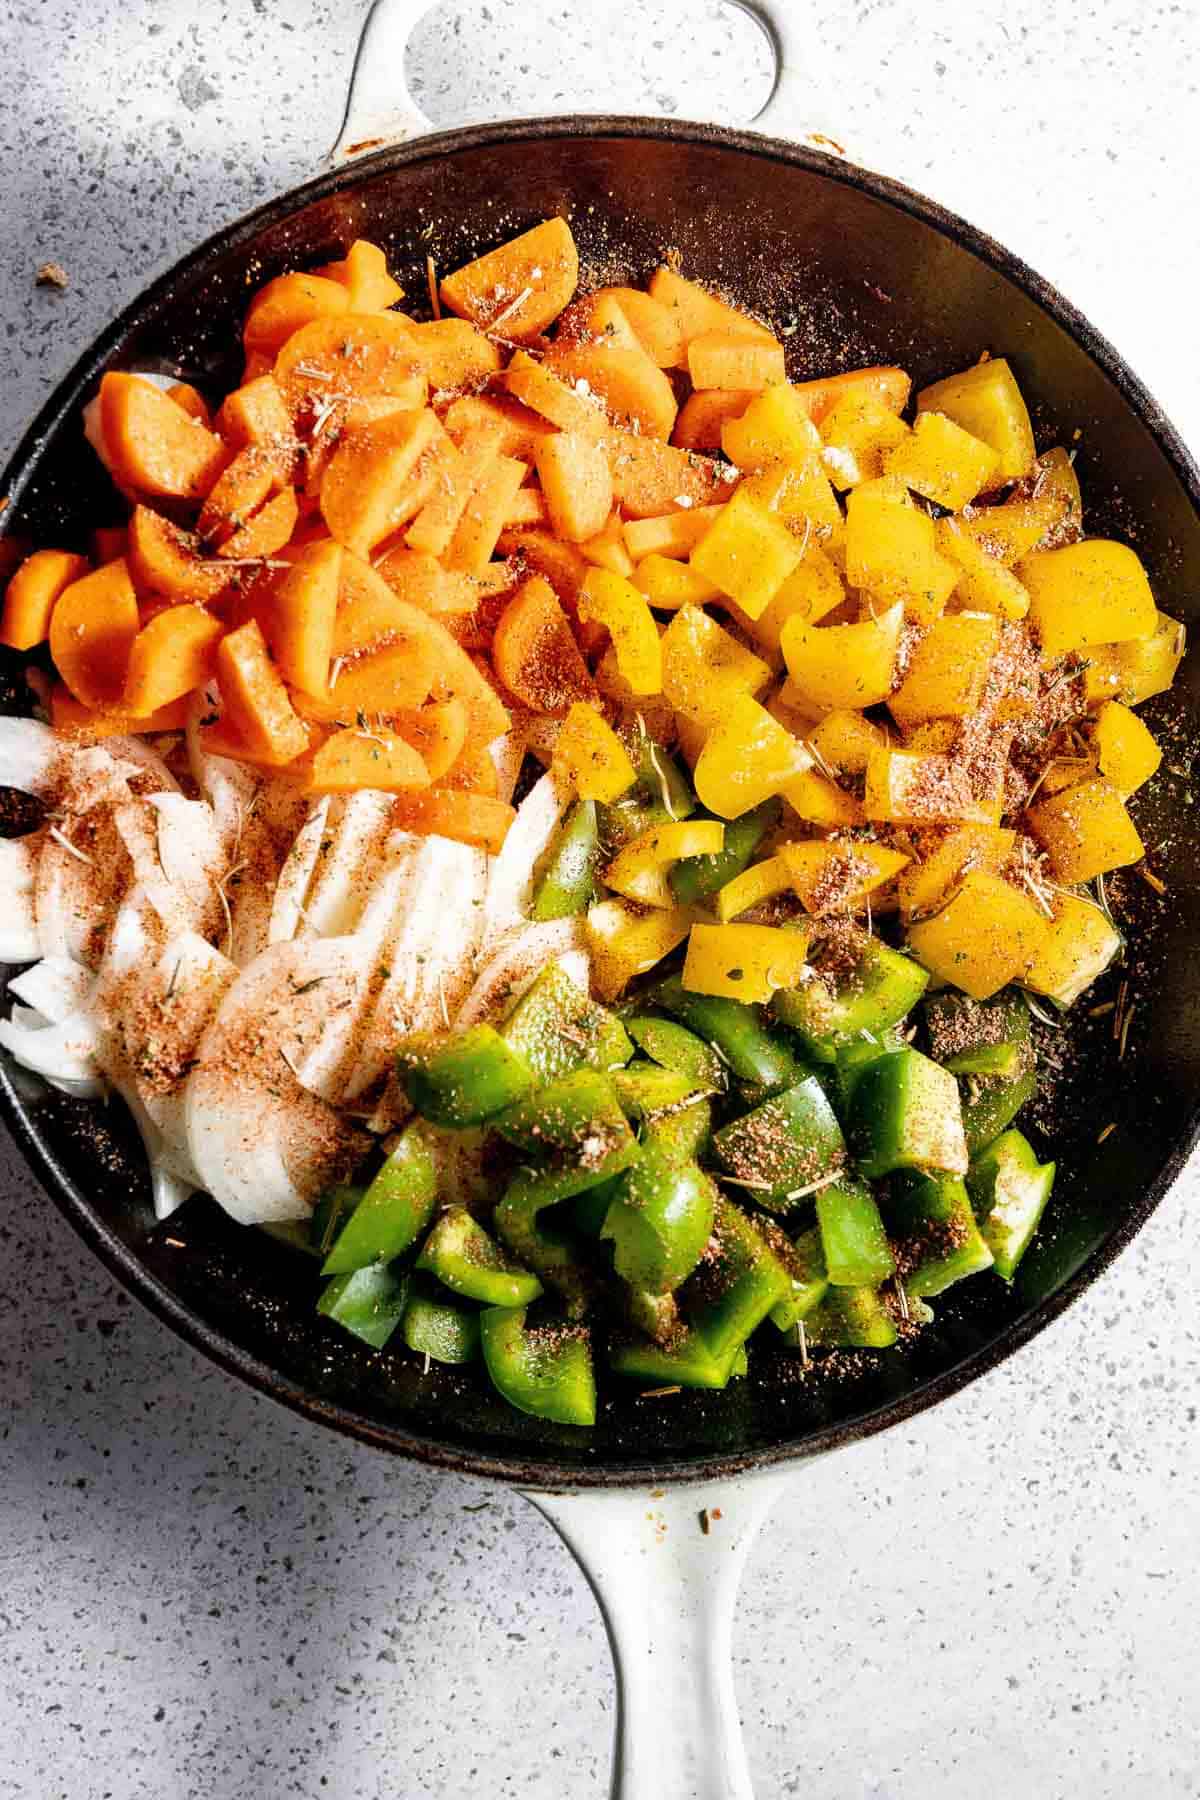 A frying pan filled with vegetables and spices.